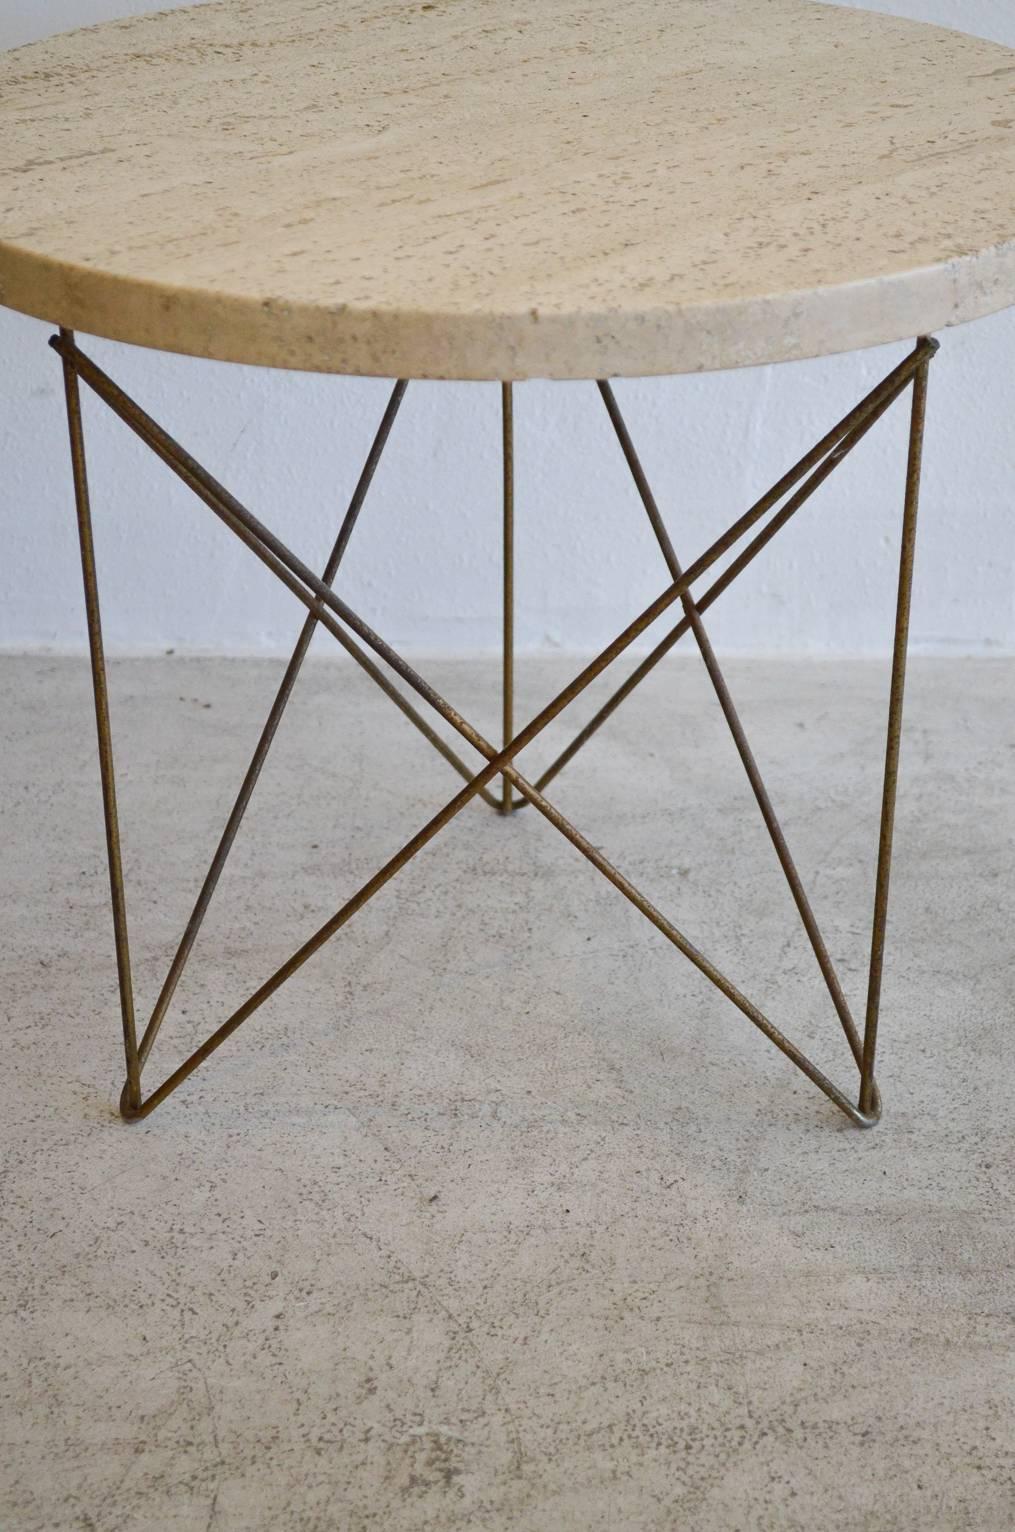 Original Rene Brancusi Italian travertine and brass wire base end or occasional table. Travertine stamped on underside produced in Italy.

In the 1950s Rene Brancusi showrooms in Los Angeles, Miami and New York specialized in imported marble